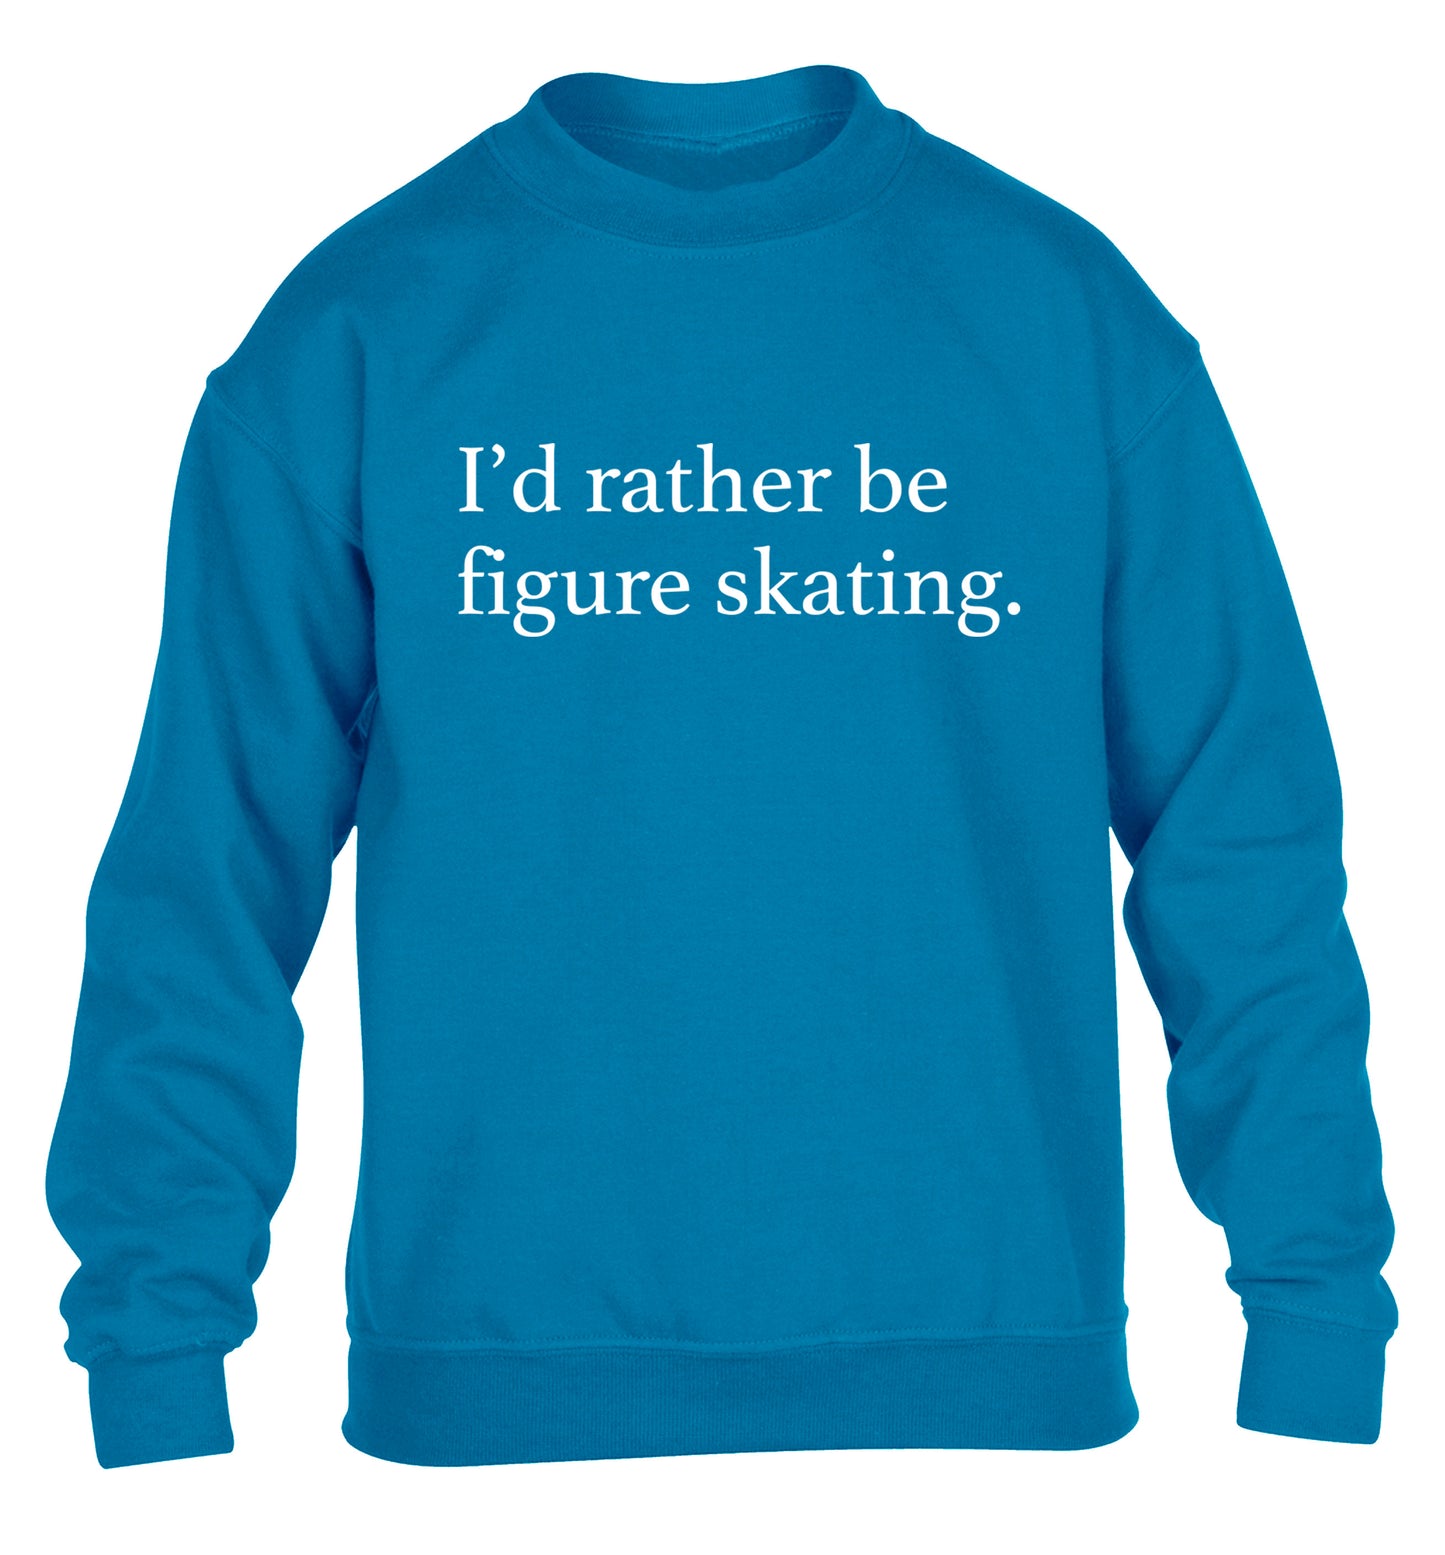 I'd rather be figure skating children's blue sweater 12-14 Years